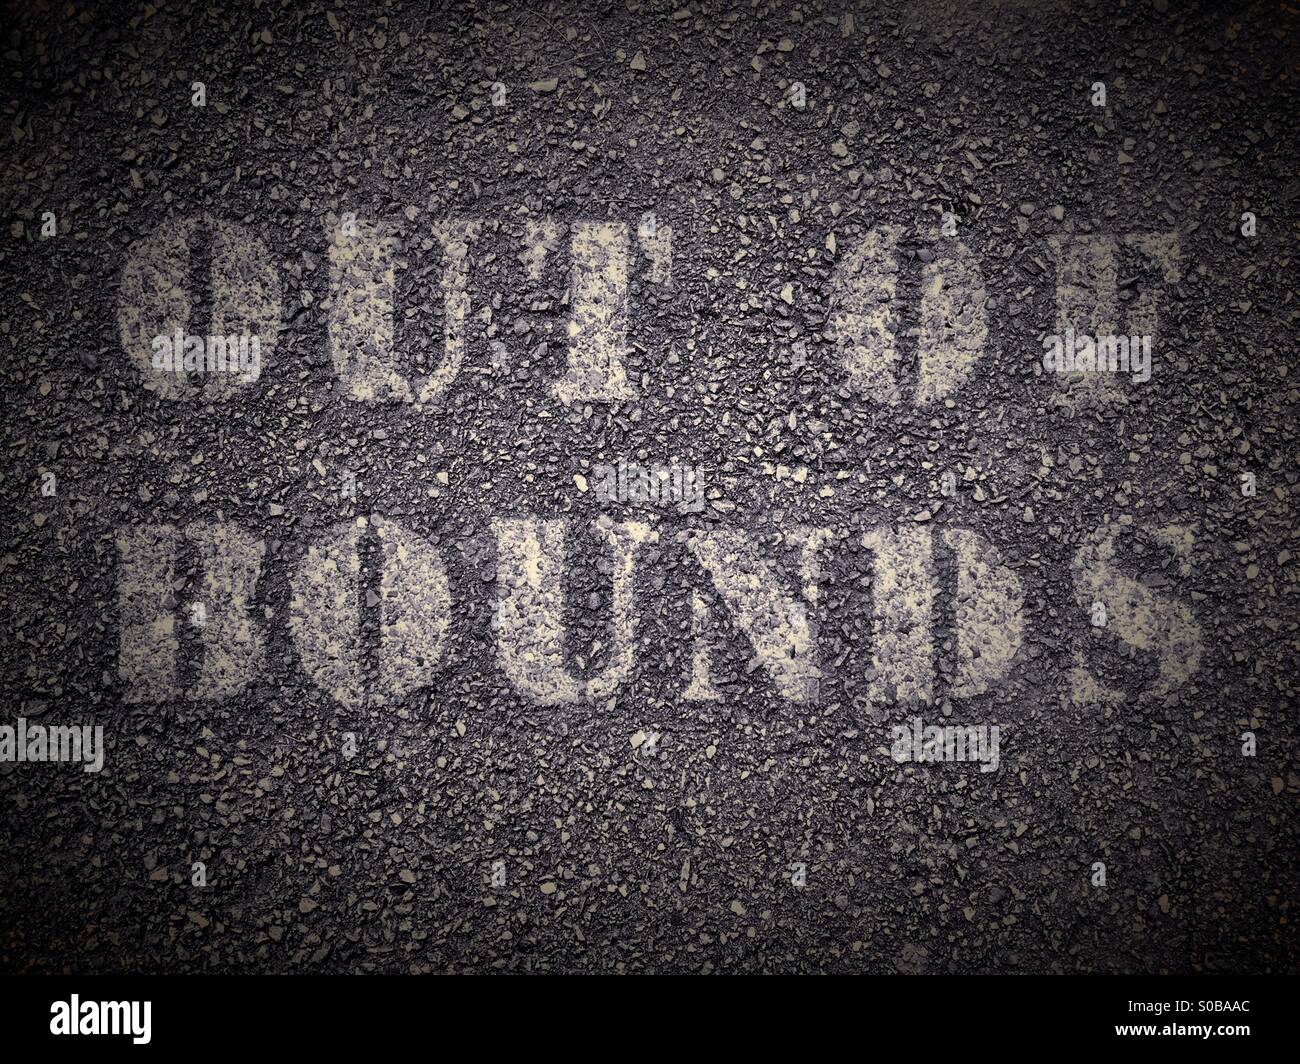 An 'out of bounds' sign on a pavement Stock Photo